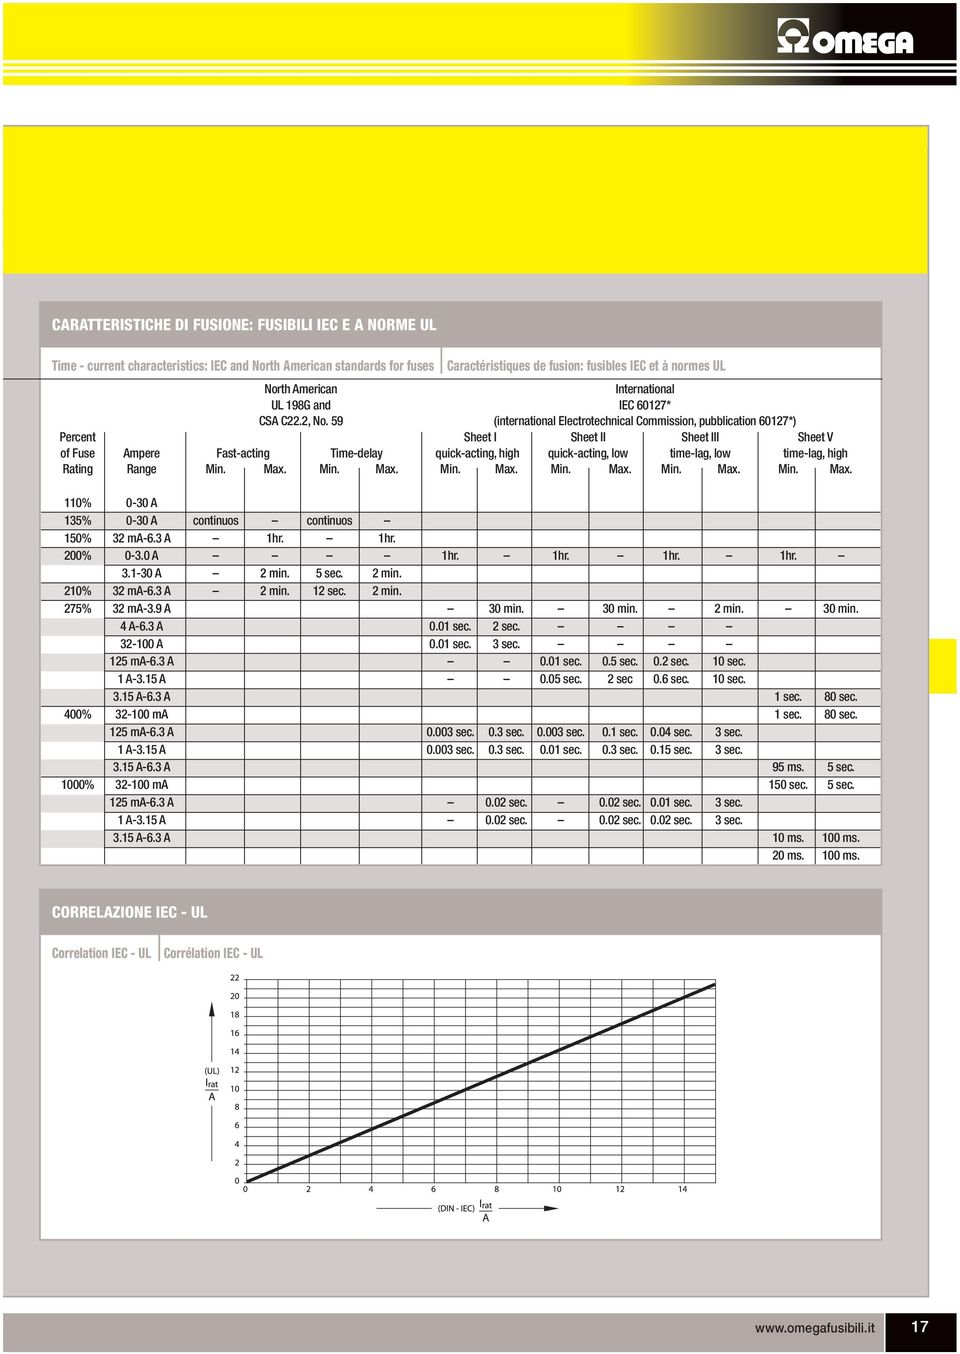 59 (international Electrotechnical Commission, pubblication 6027*) Percent of Fuse Ampere Fast-acting Time-delay Sheet I quick-acting, high Sheet II quick-acting, low Sheet III time-lag, low Sheet V